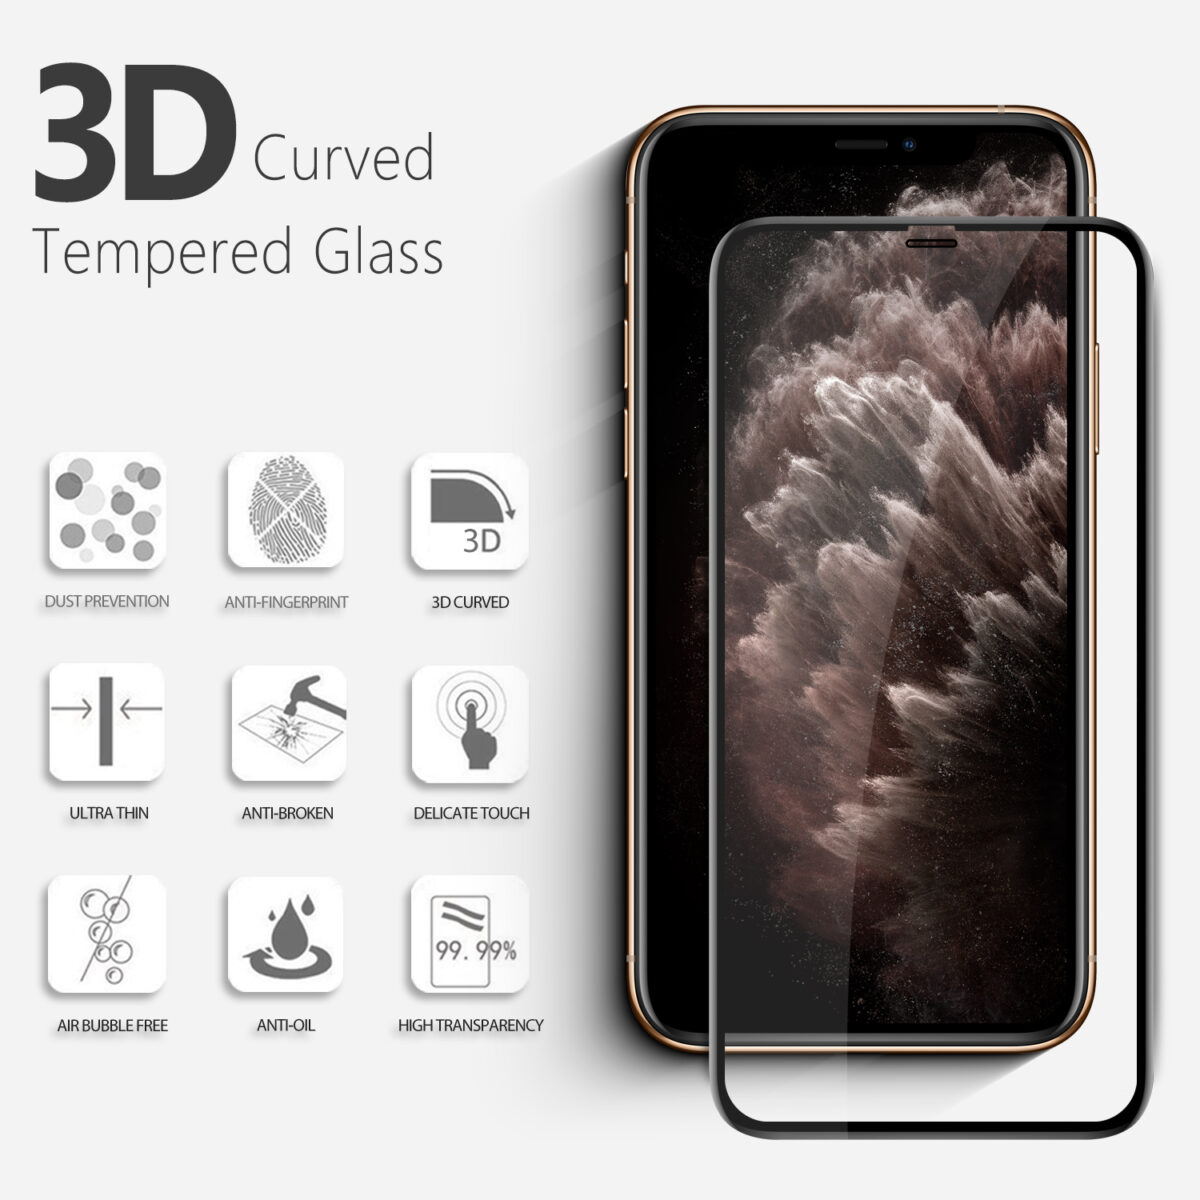 Vmax Tempered Glass screen protectors for iPhone XS